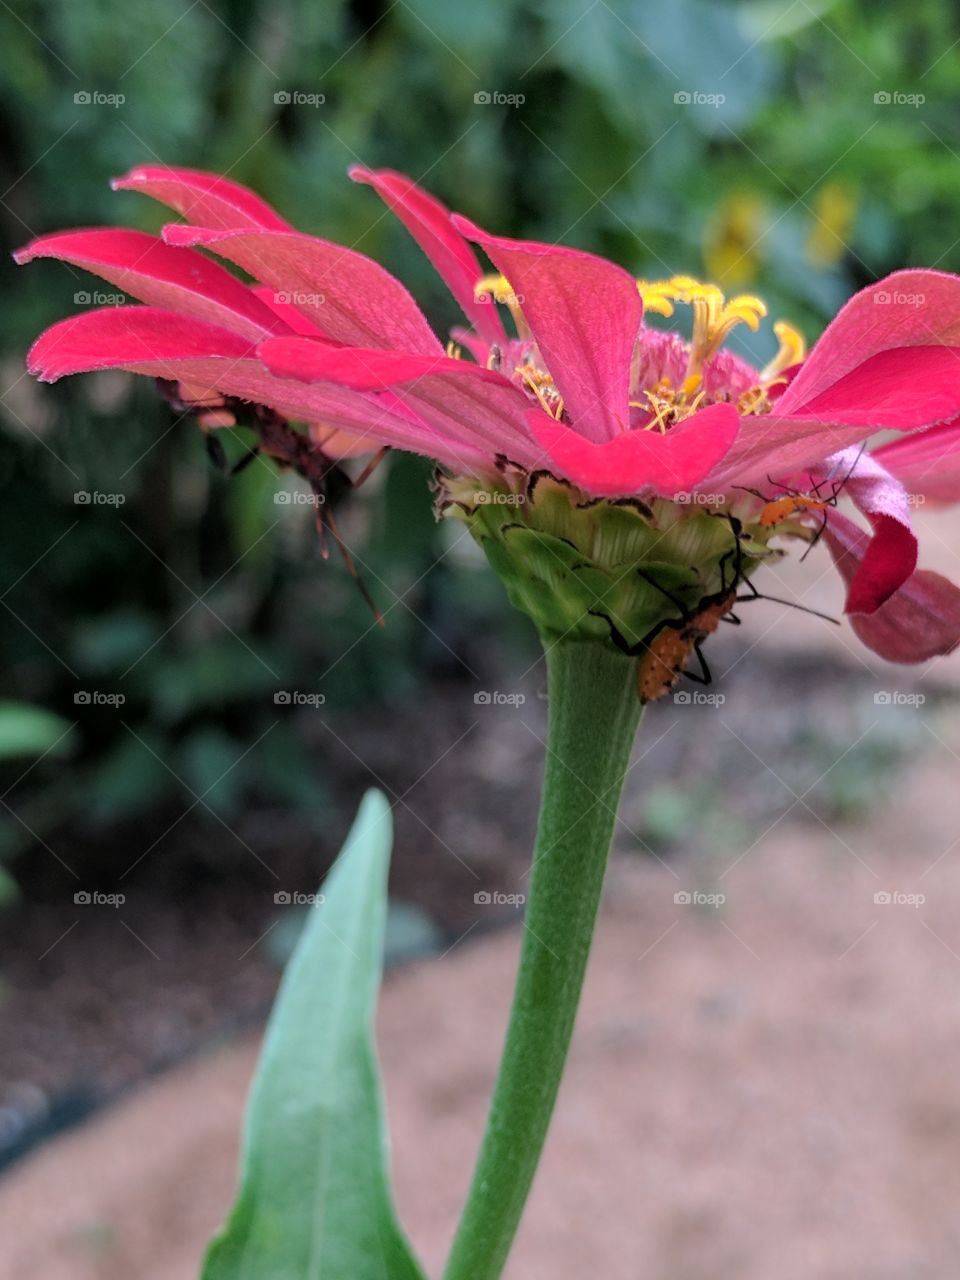 bugs invading a Mexican sunflower